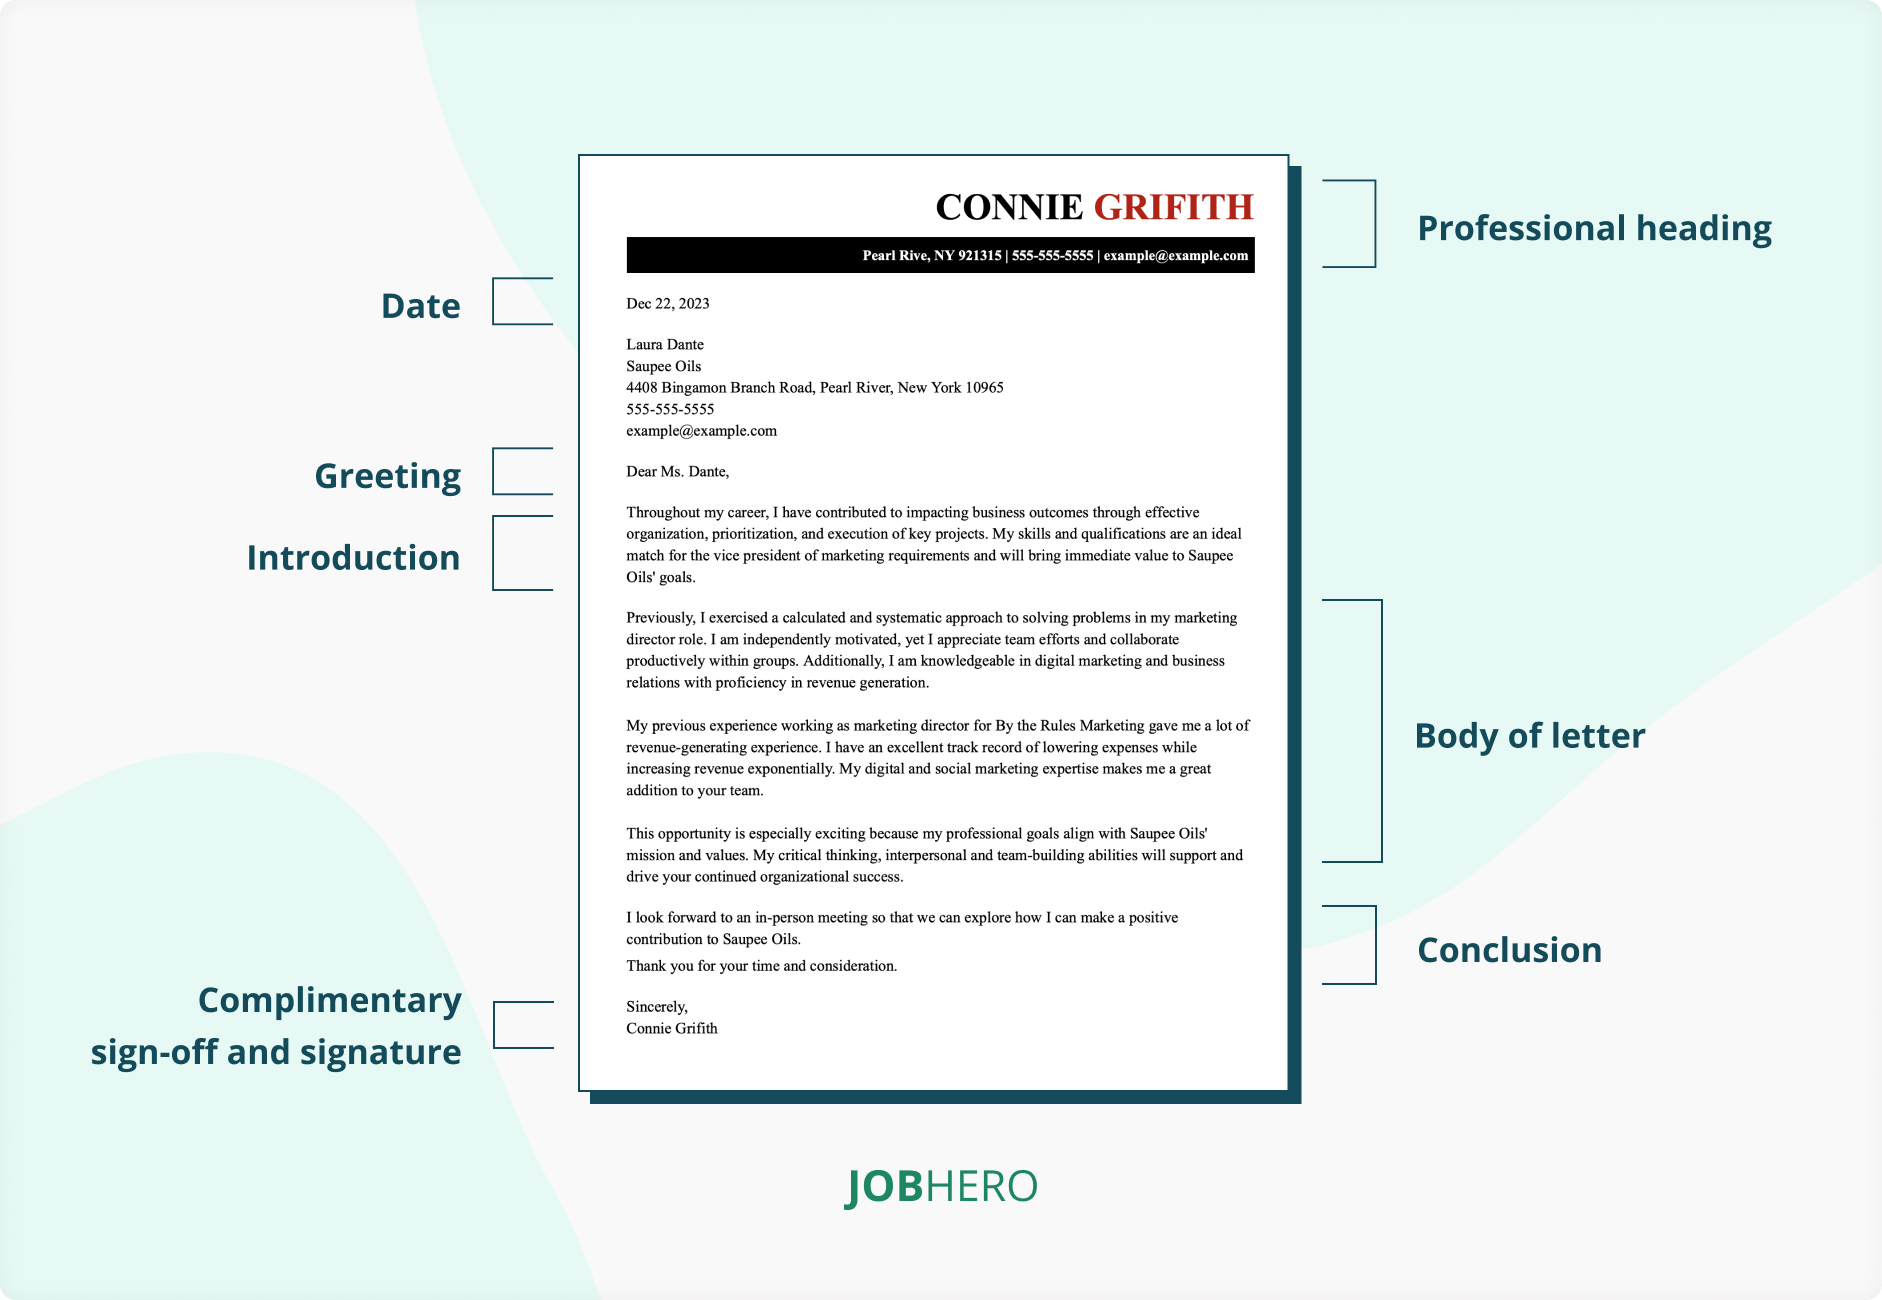 6 parts of cover letter